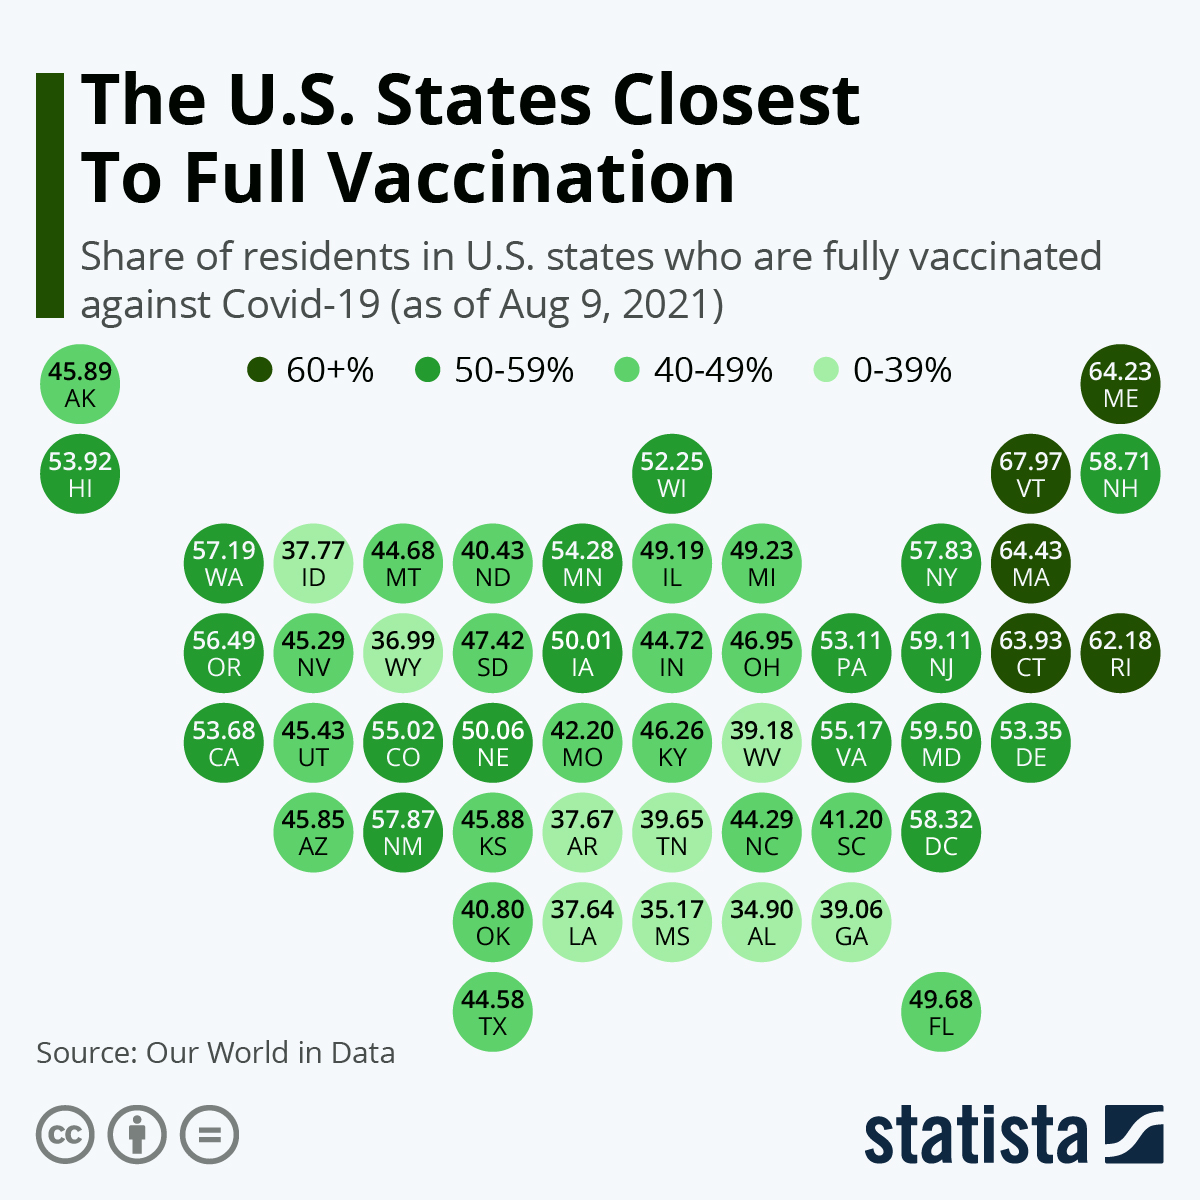 The U.S. States Closest To Full Vaccination